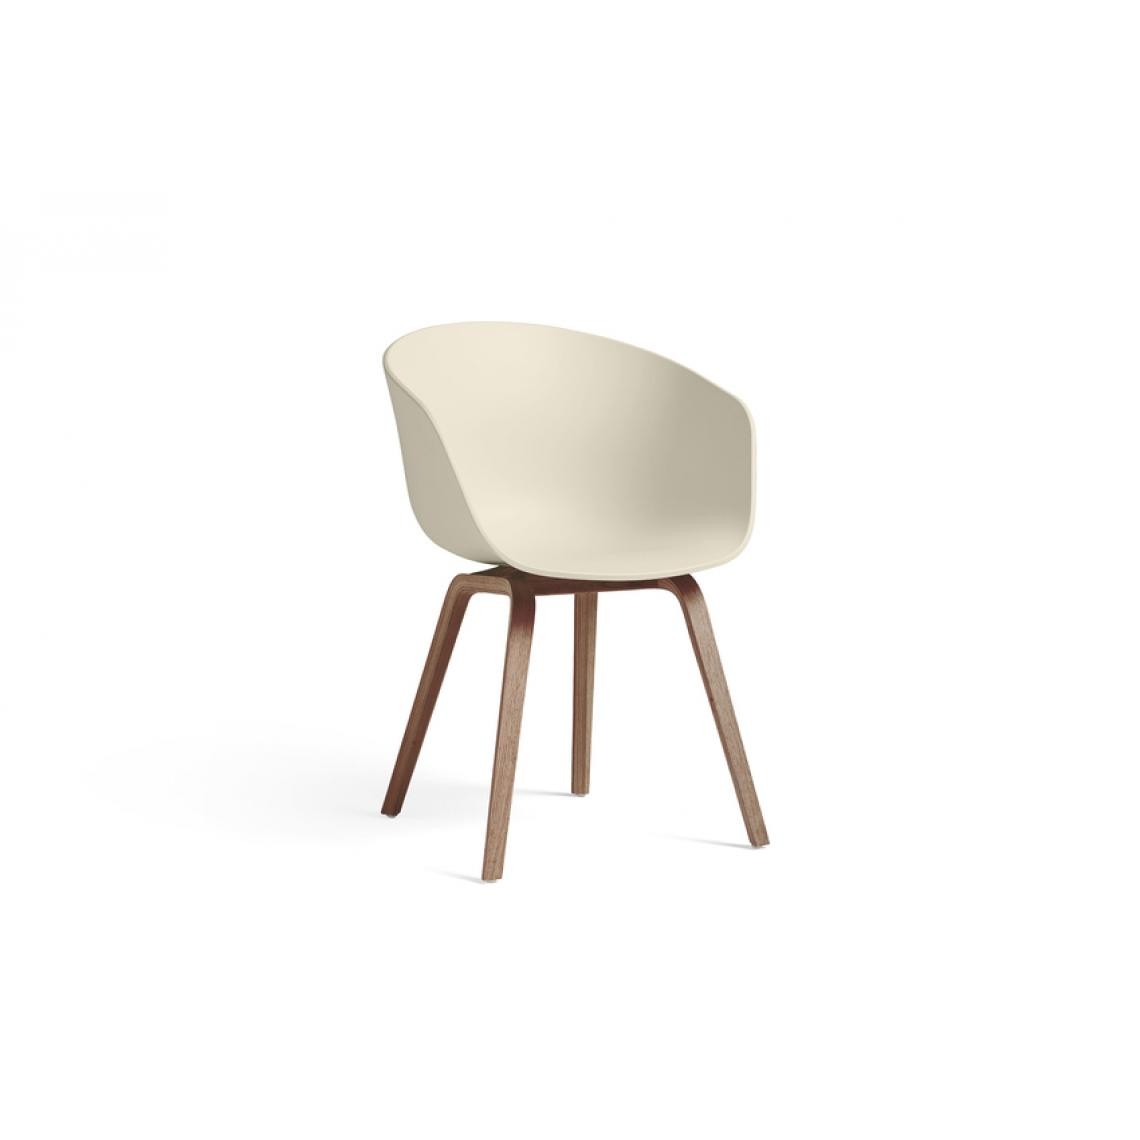 Hay - About A Chair AAC 22 ECO noyer - blanc crème - Chaises